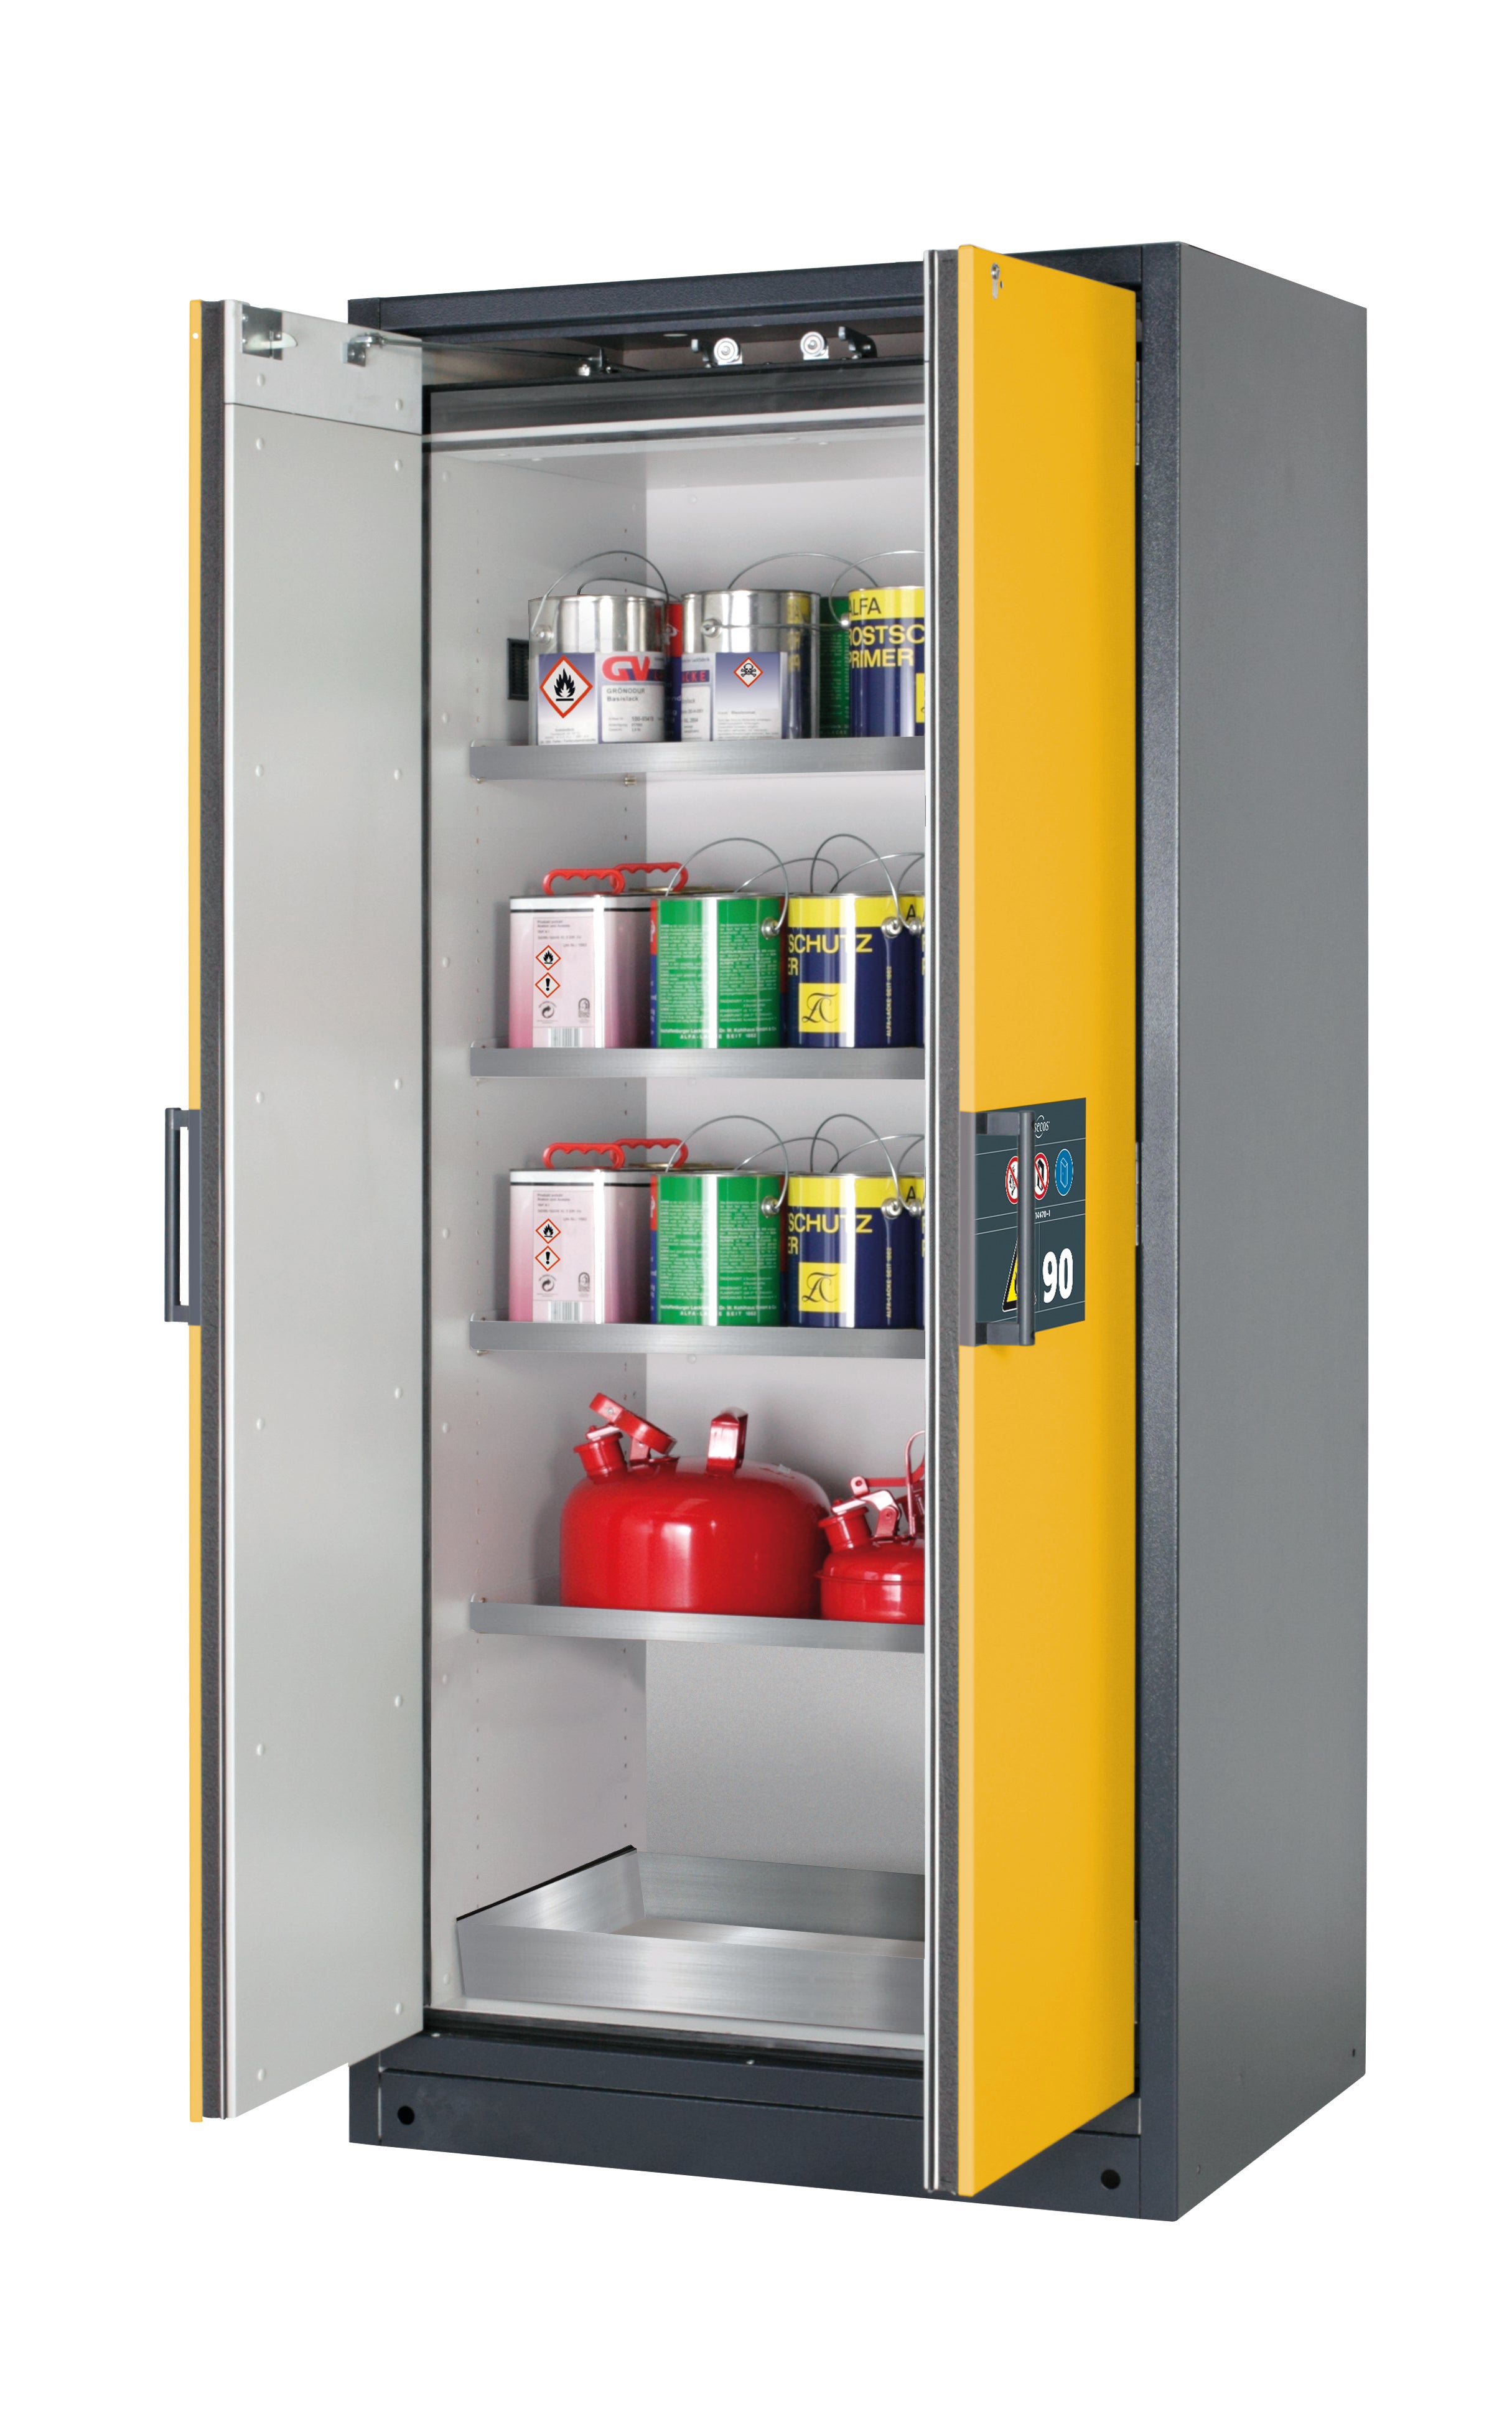 Type 90 safety storage cabinet Q-CLASSIC-90 model Q90.195.090 in warning yellow RAL 1004 with 4x shelf standard (stainless steel 1.4301),